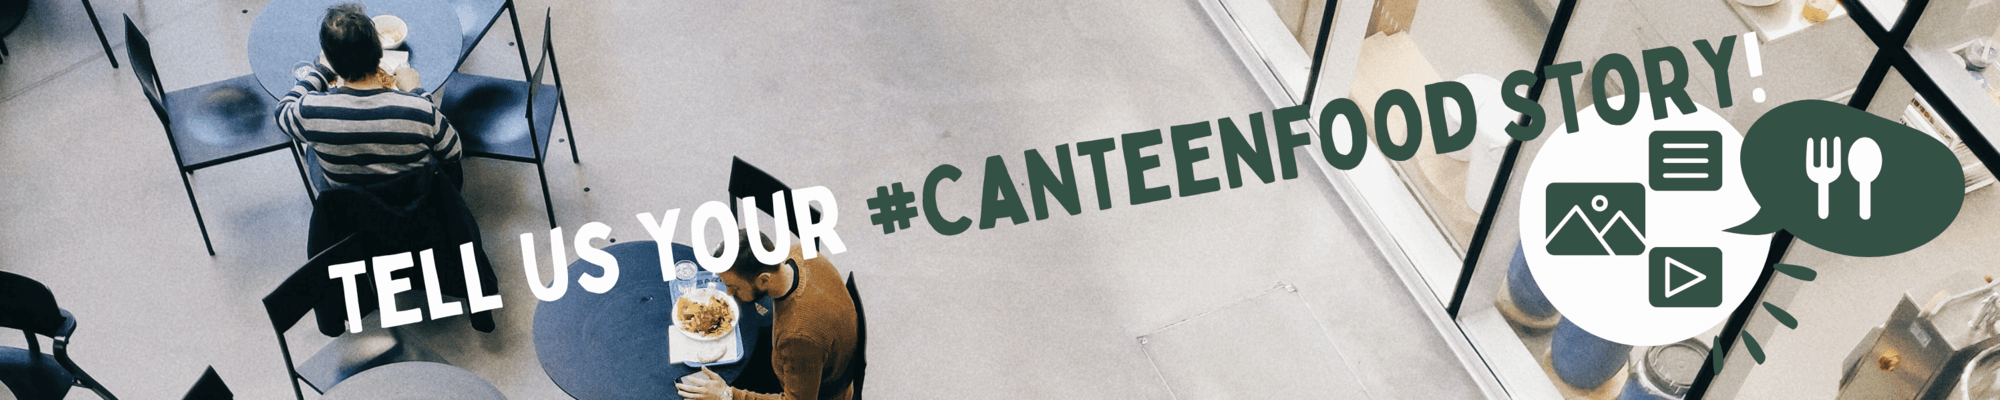 The image shows a canteen from a bird's perspective with the slogan in the front "Tell us your #canteenfood story!"